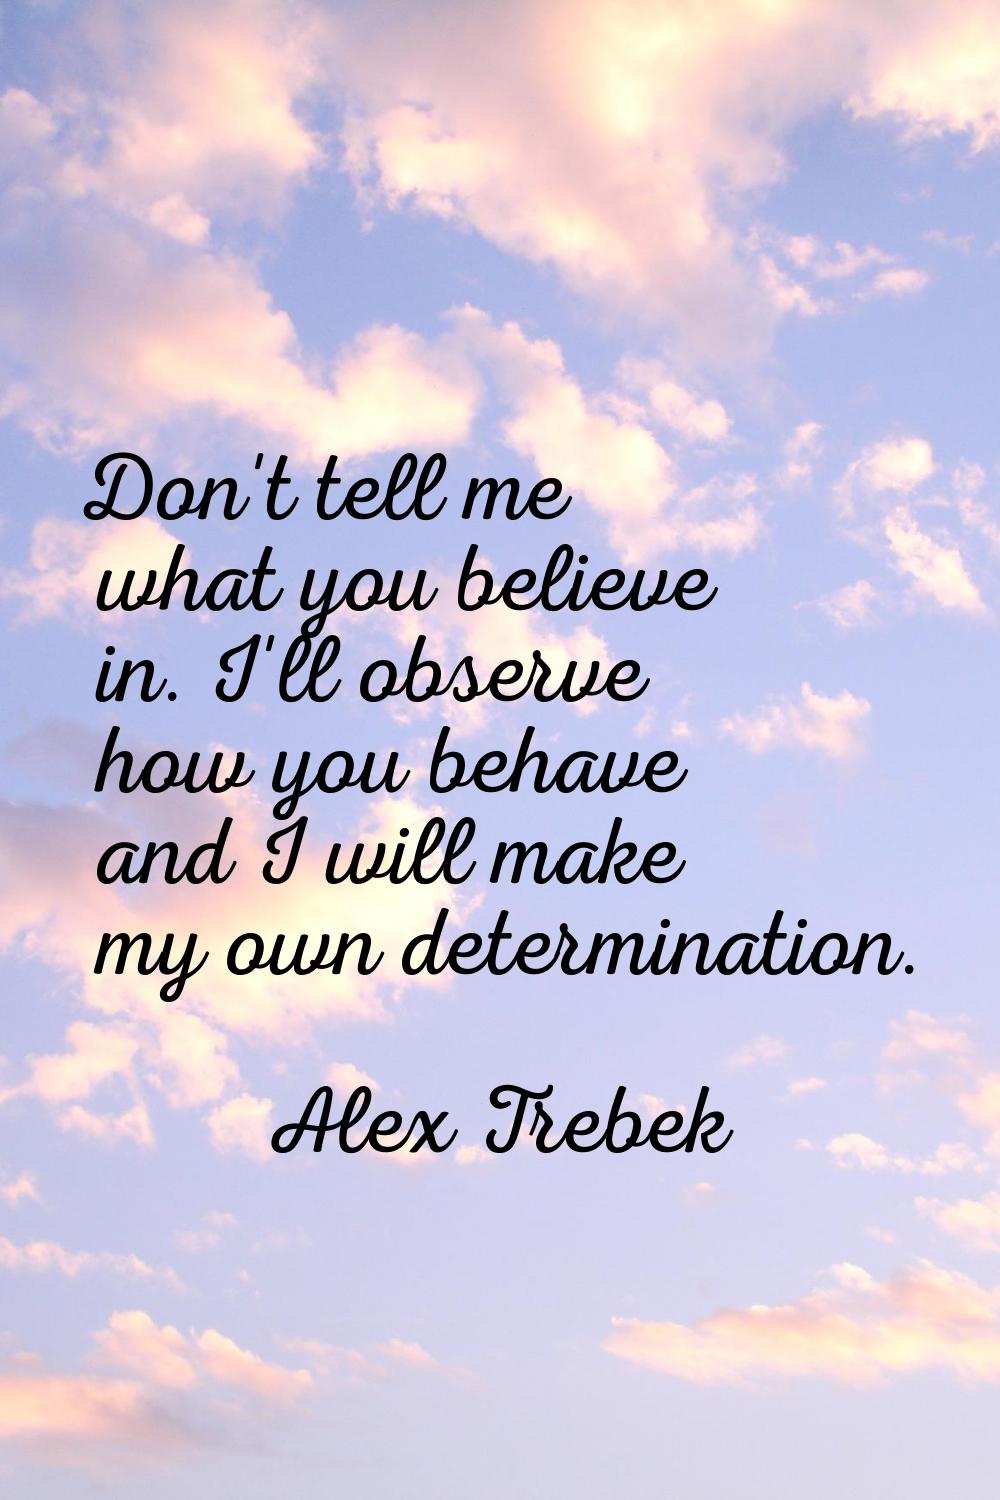 Don't tell me what you believe in. I'll observe how you behave and I will make my own determination